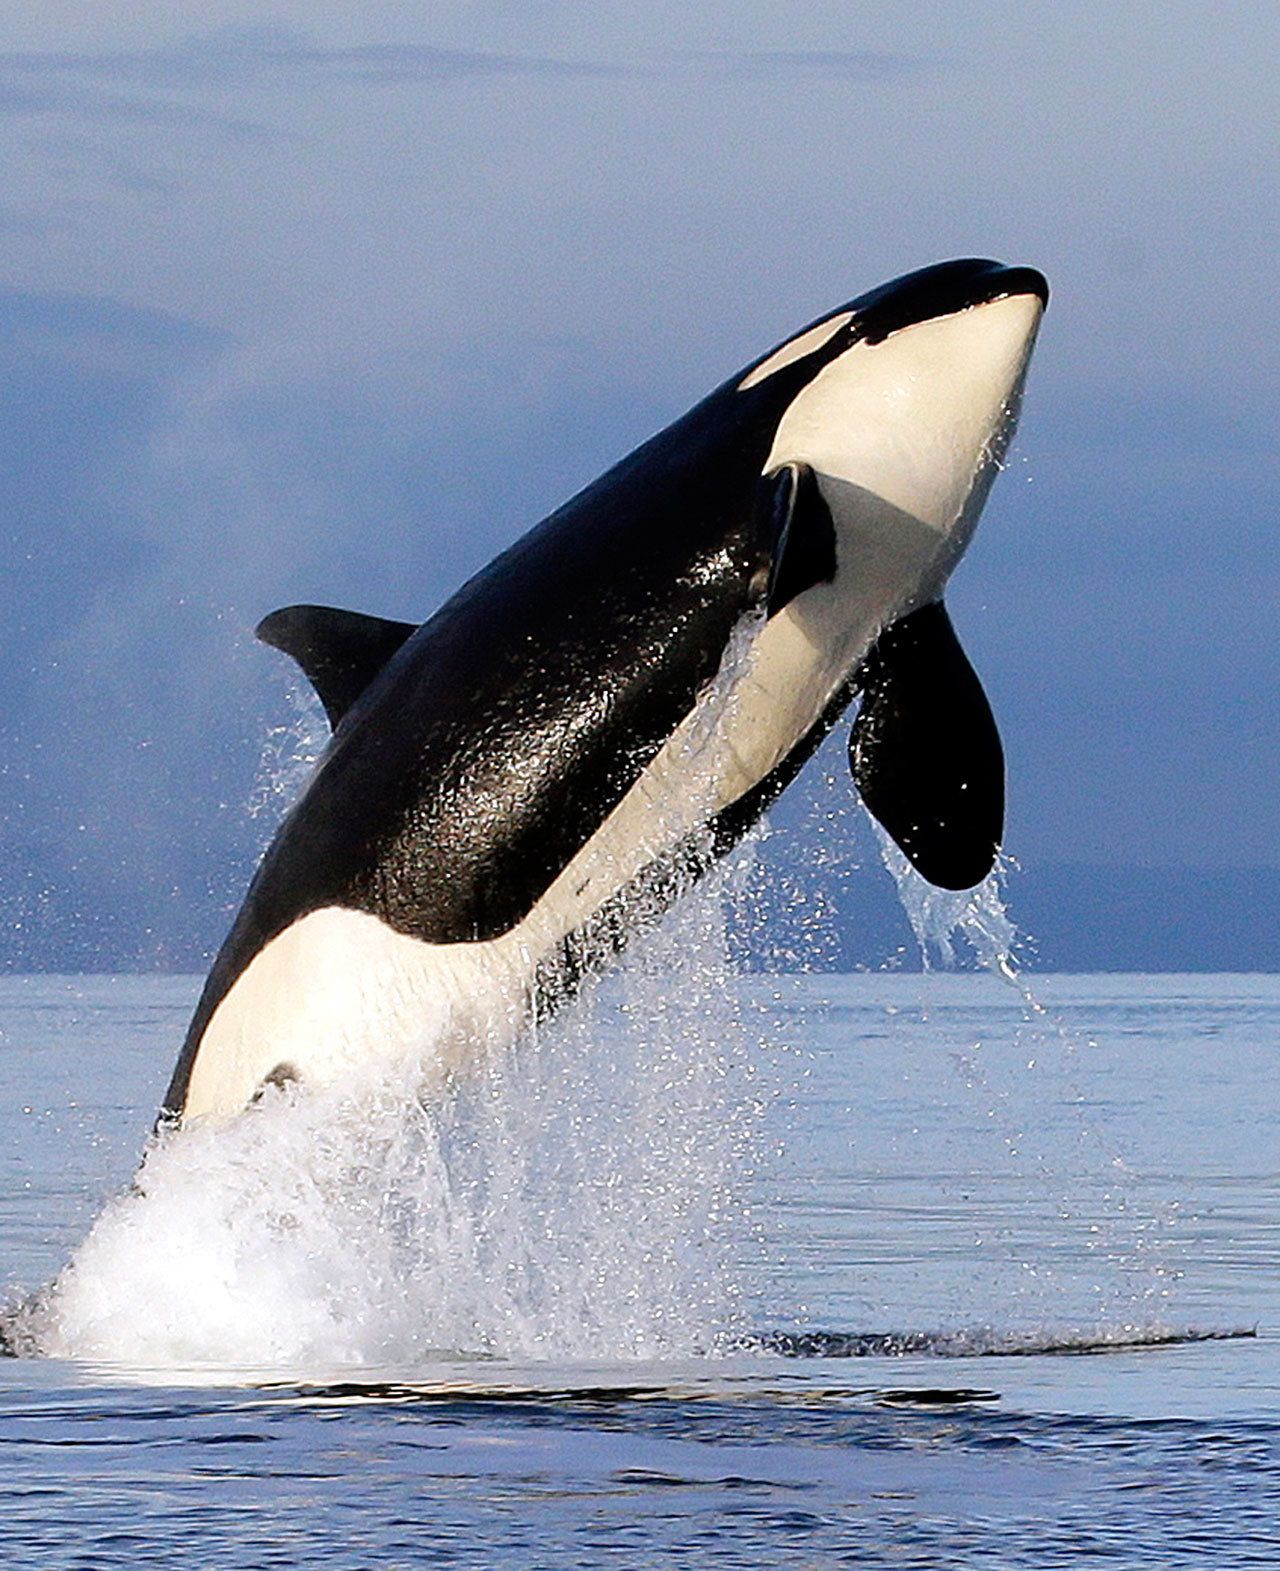 A female orca leaps from the water in Puget Sound west of Seattle on Jan. 18, 2014, as seen from a federal research vessel that had been tracking the animal. (Elaine Thompson/The Associated Press)